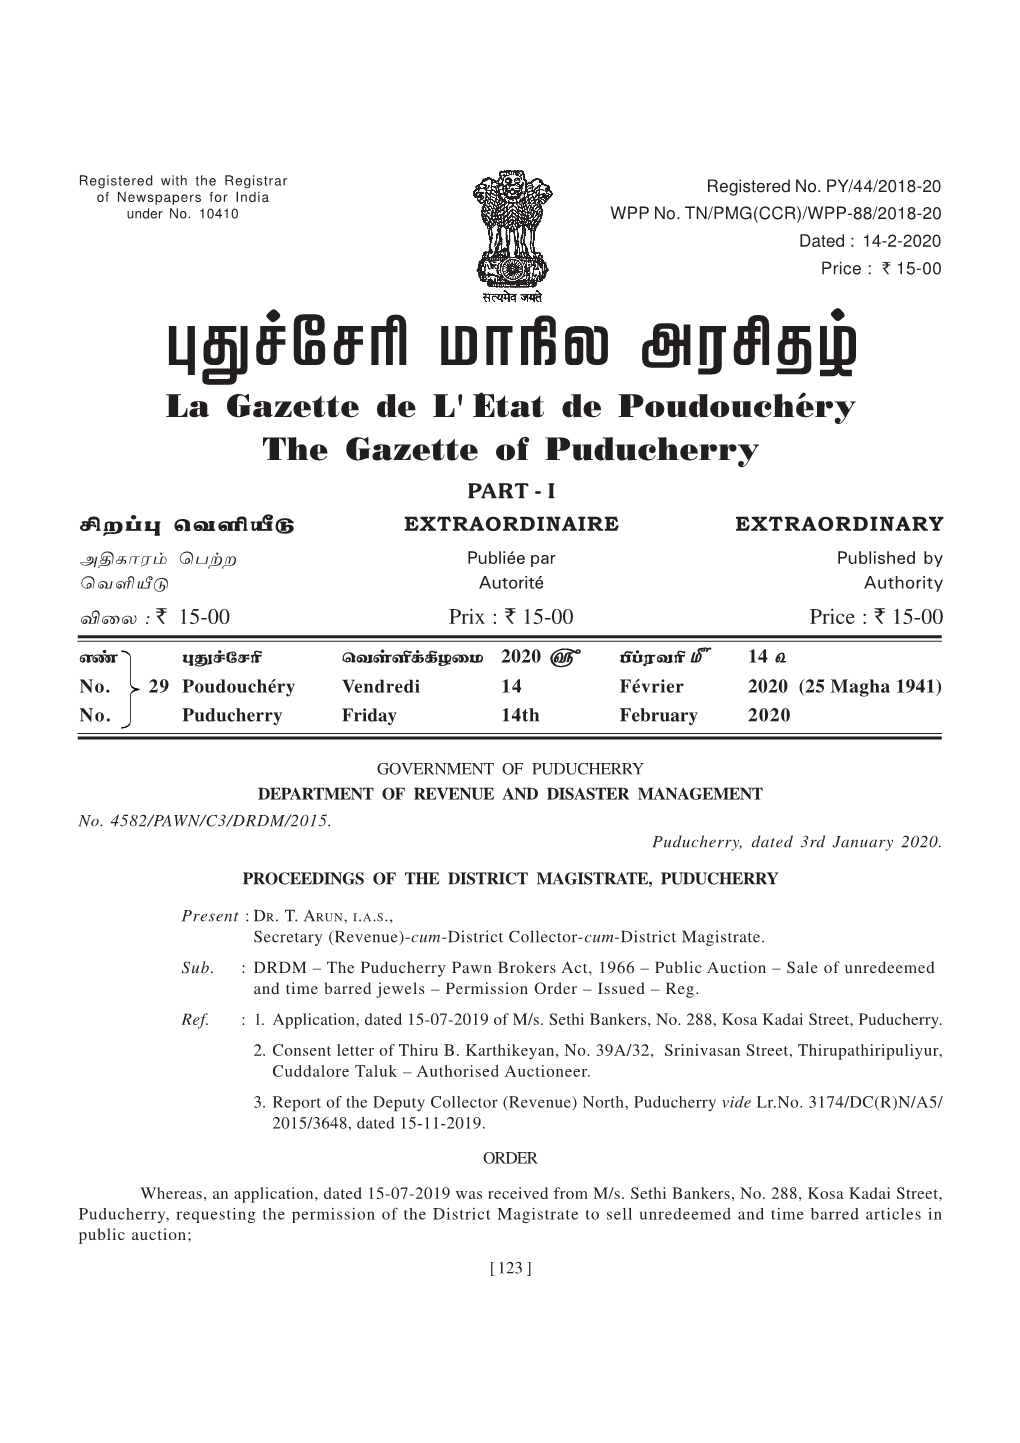 029-PART-I No. 029 Dated 14-02-2020 Department of Revenue and Disaster Management.Pmd